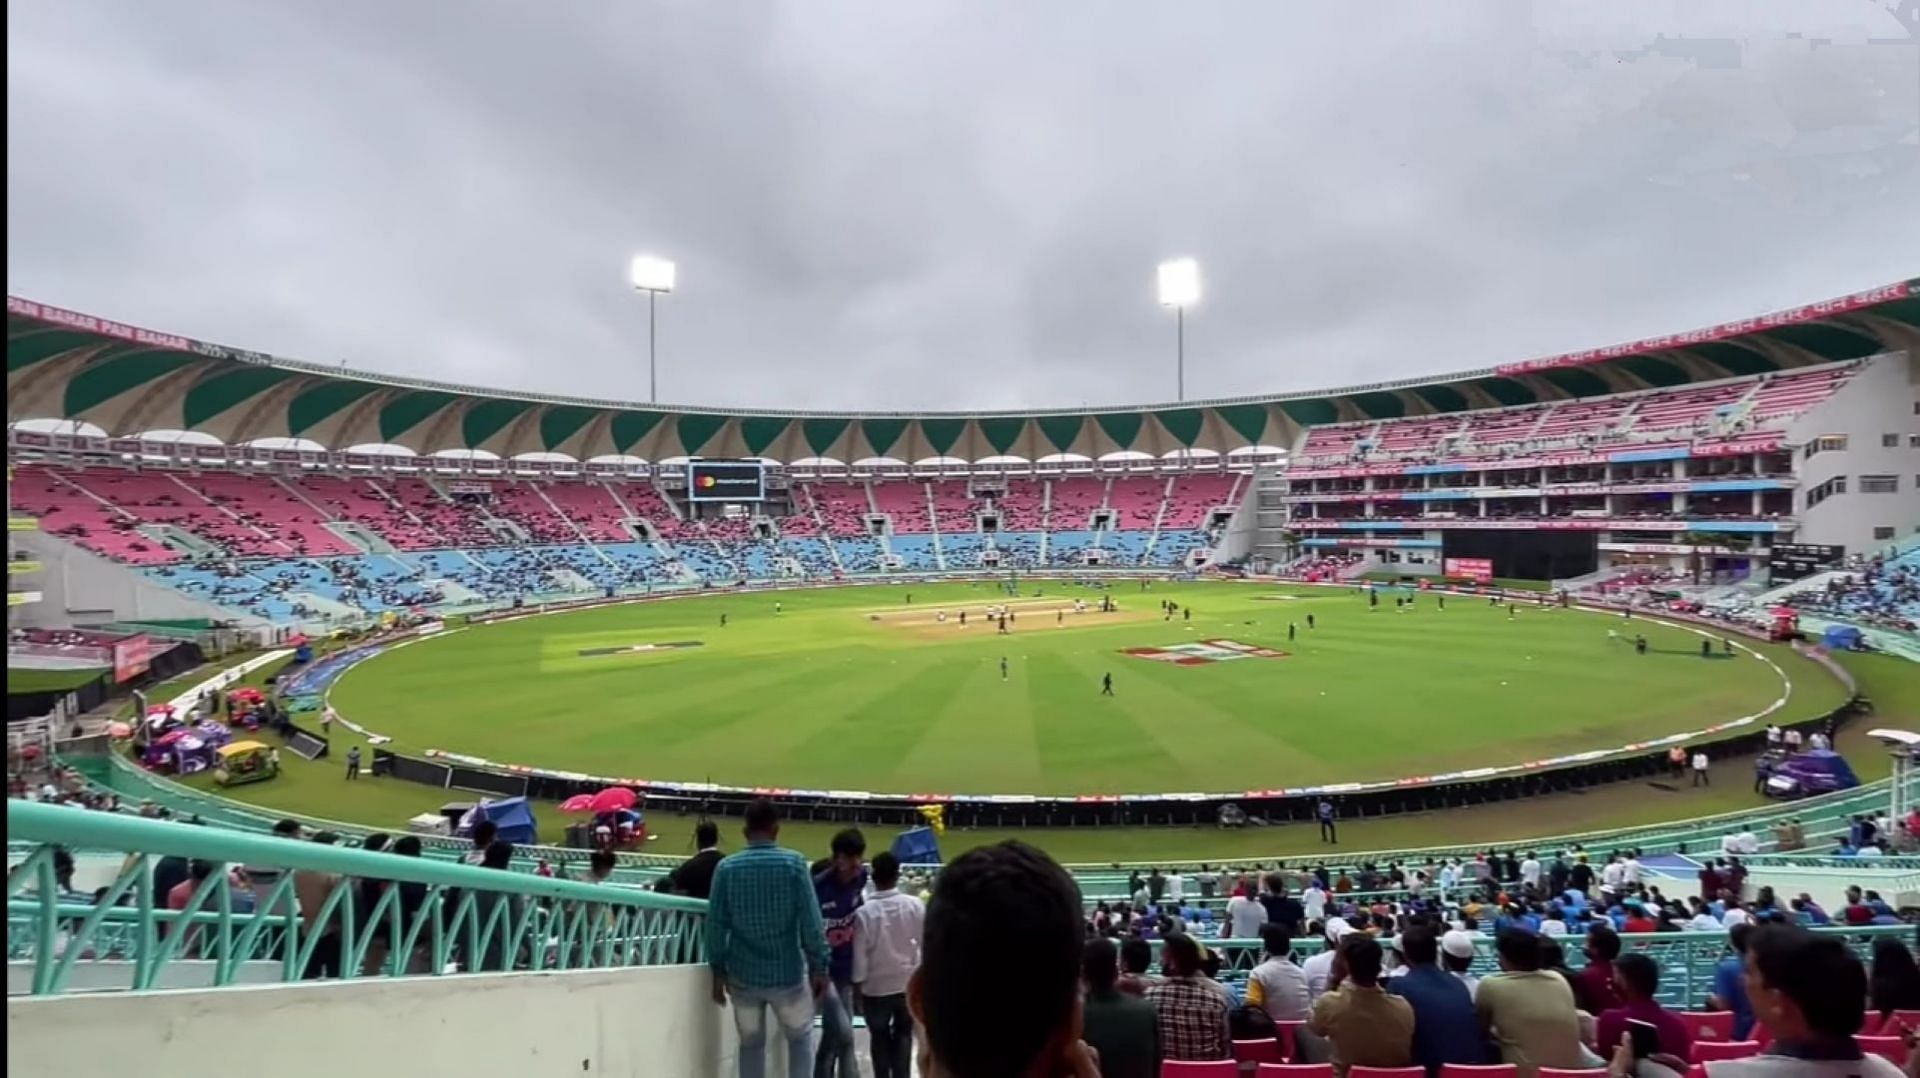 LSG will look to make the Ekana Cricket Stadium a fortress in IPL 2023